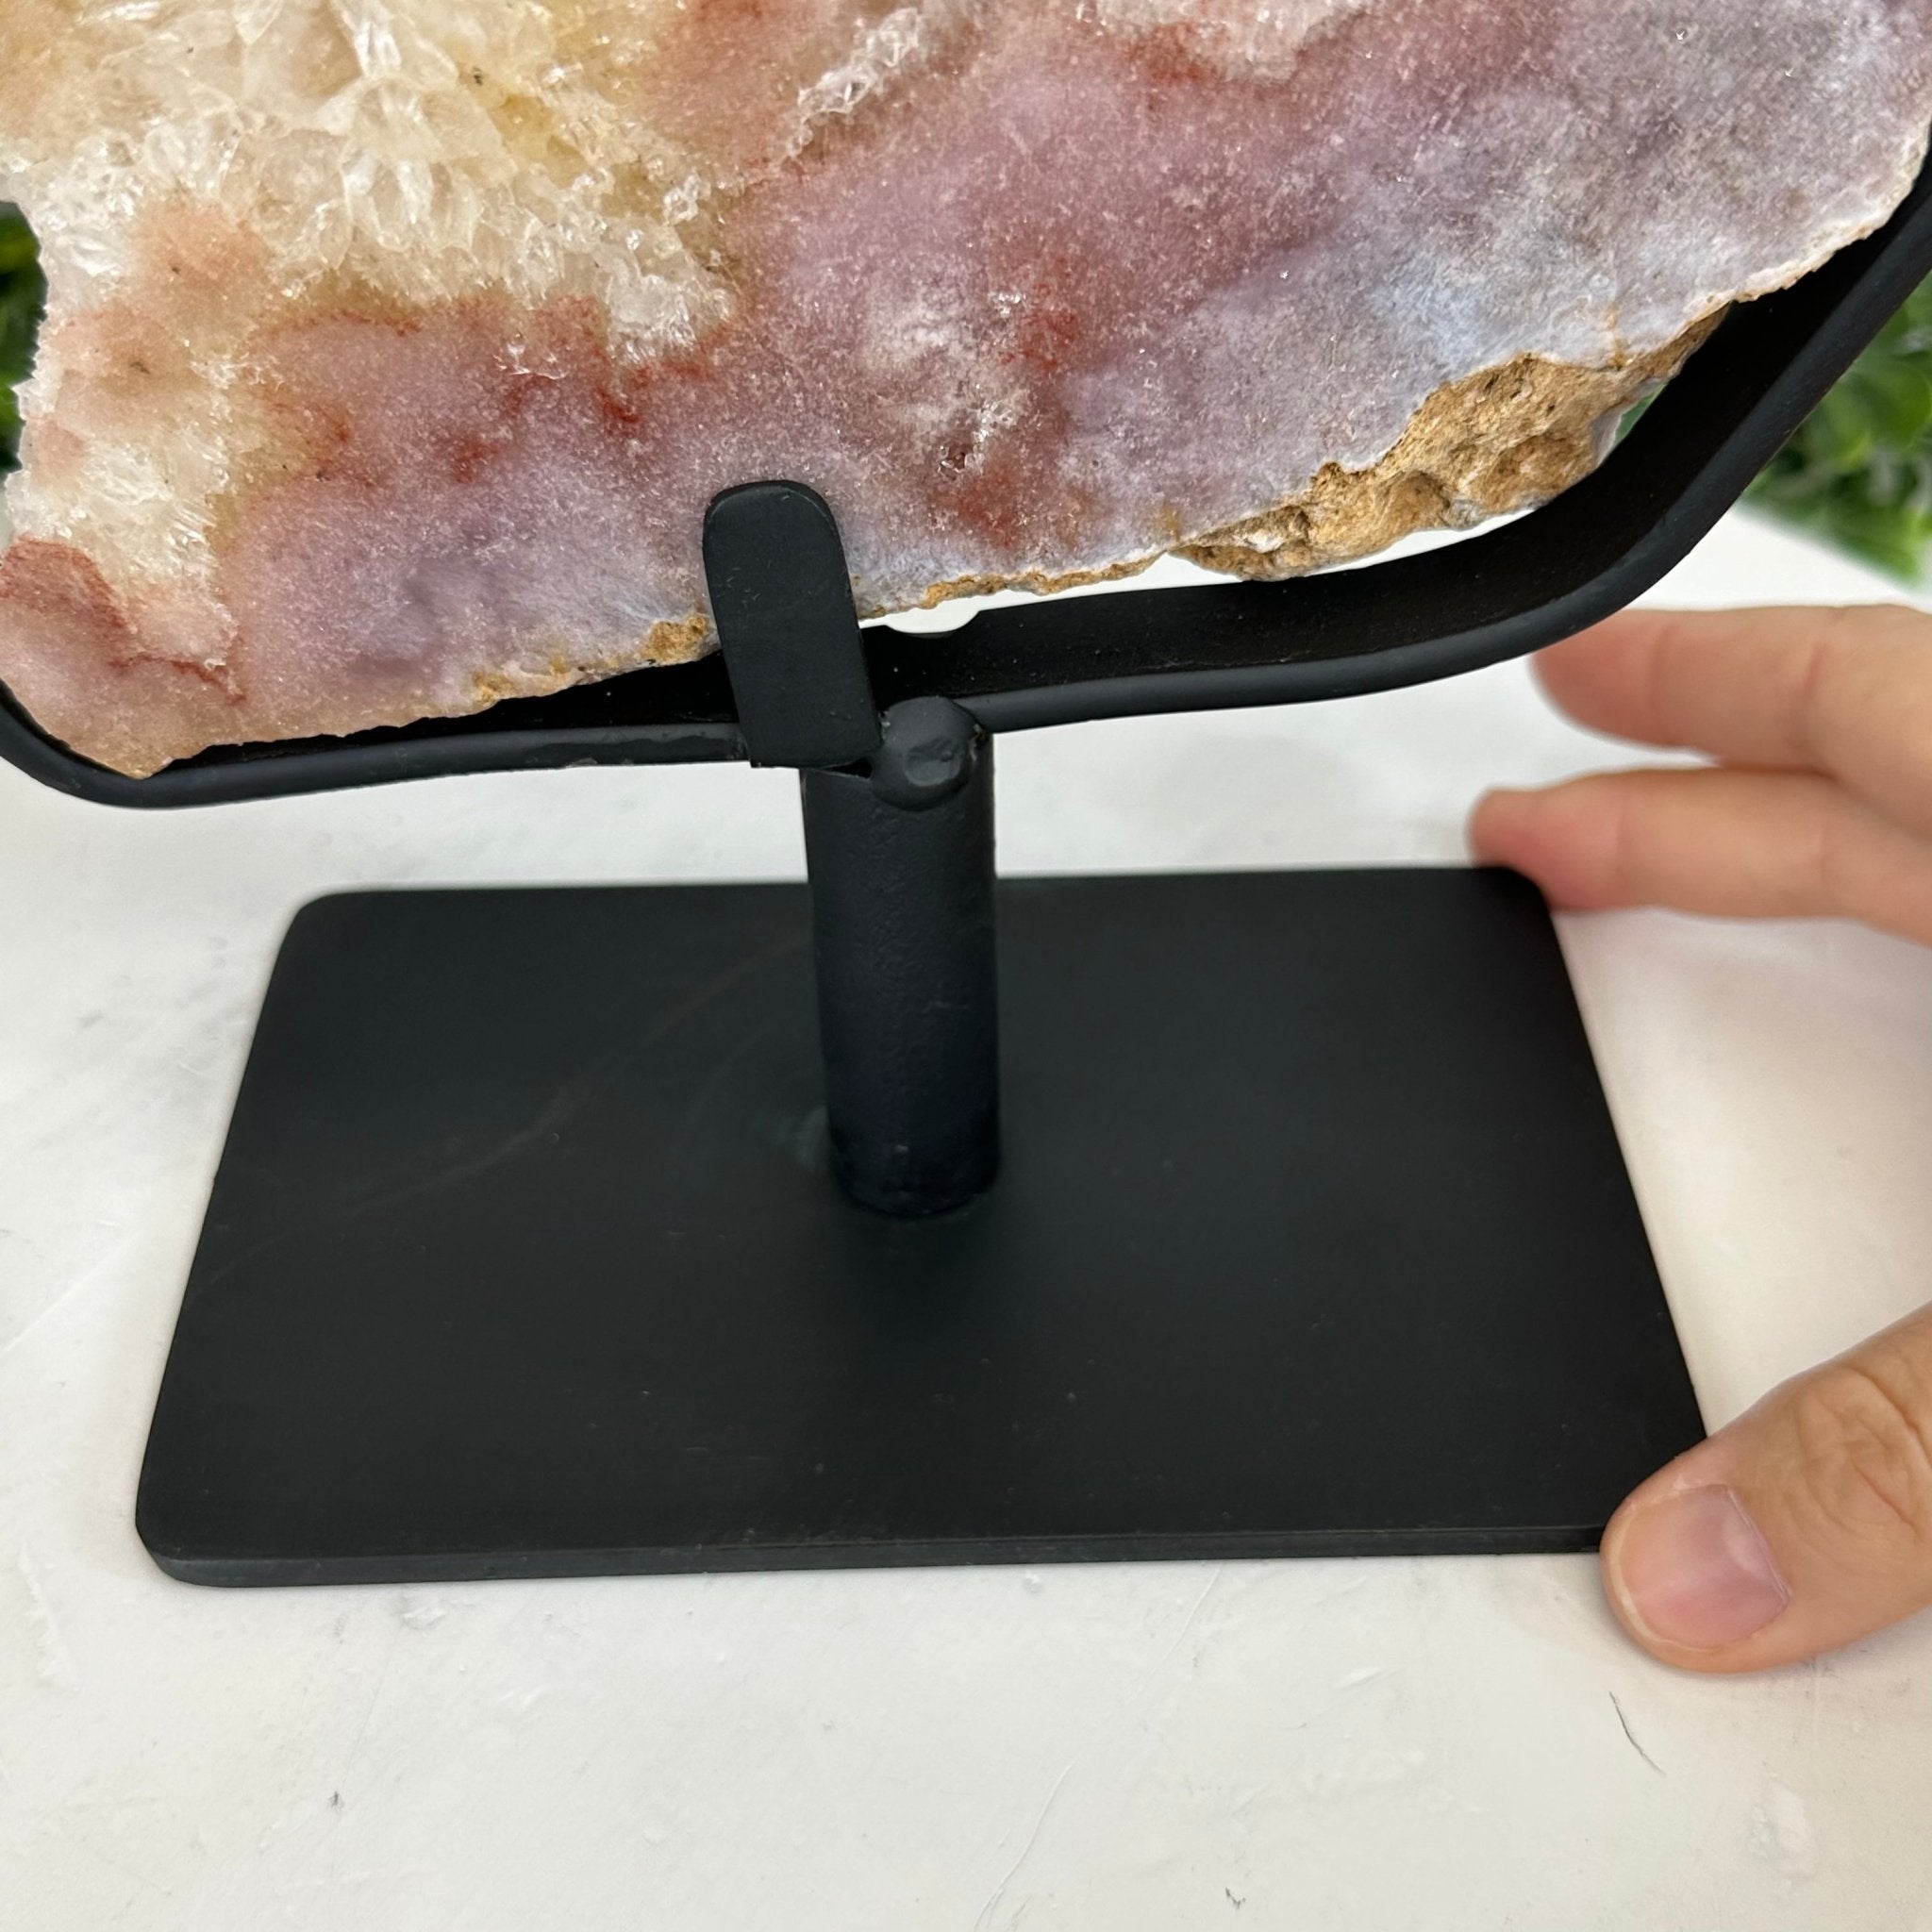 Polished Pink Amethyst Slice on a Stand, 11.6 lbs, 17.5" Tall #5743-0010 by Brazil Gems - Brazil GemsBrazil GemsPolished Pink Amethyst Slice on a Stand, 11.6 lbs, 17.5" Tall #5743-0010 by Brazil GemsSlices on Fixed Bases5743-0010